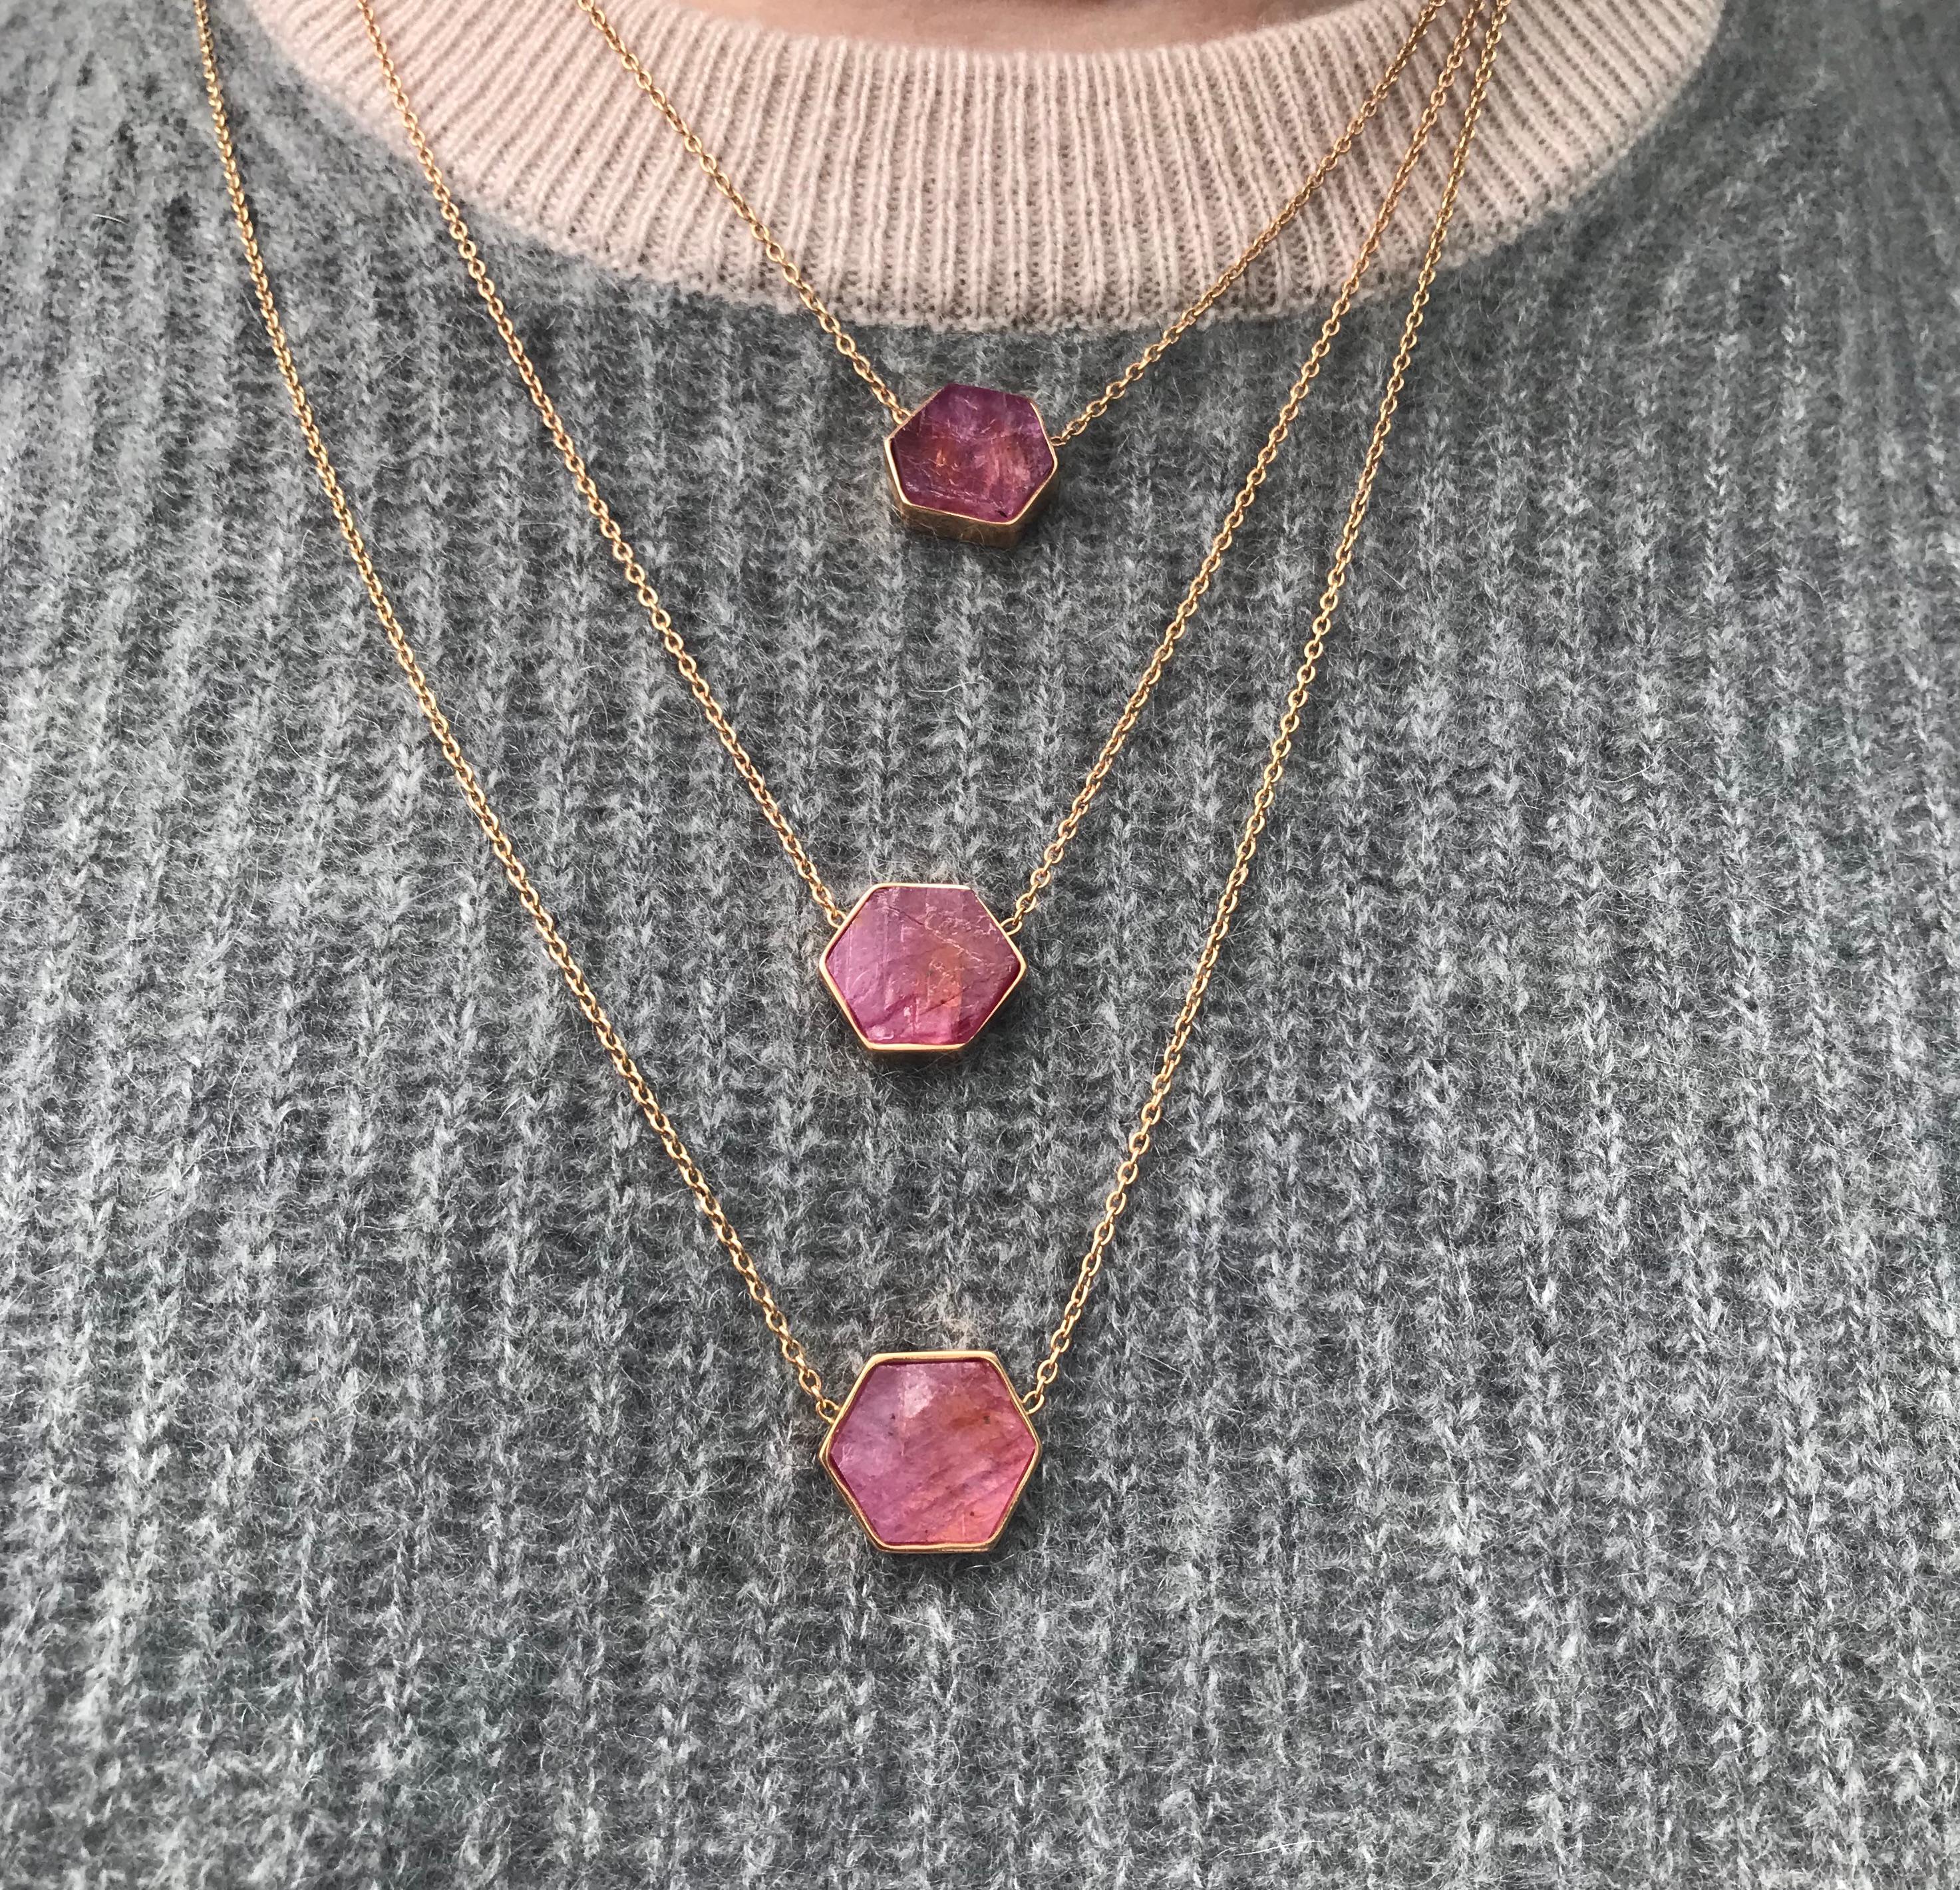 18 Karat Raw Ruby necklace features a custom geometric cut natural ruby chunk framed by an 18k Rose Gold Bezel and hung on a 28 inch 18k Rose Gold chain. 
Includes lobster clasp closure at back of the neck
18k Rose Gold, Natural Ruby
From Karma El